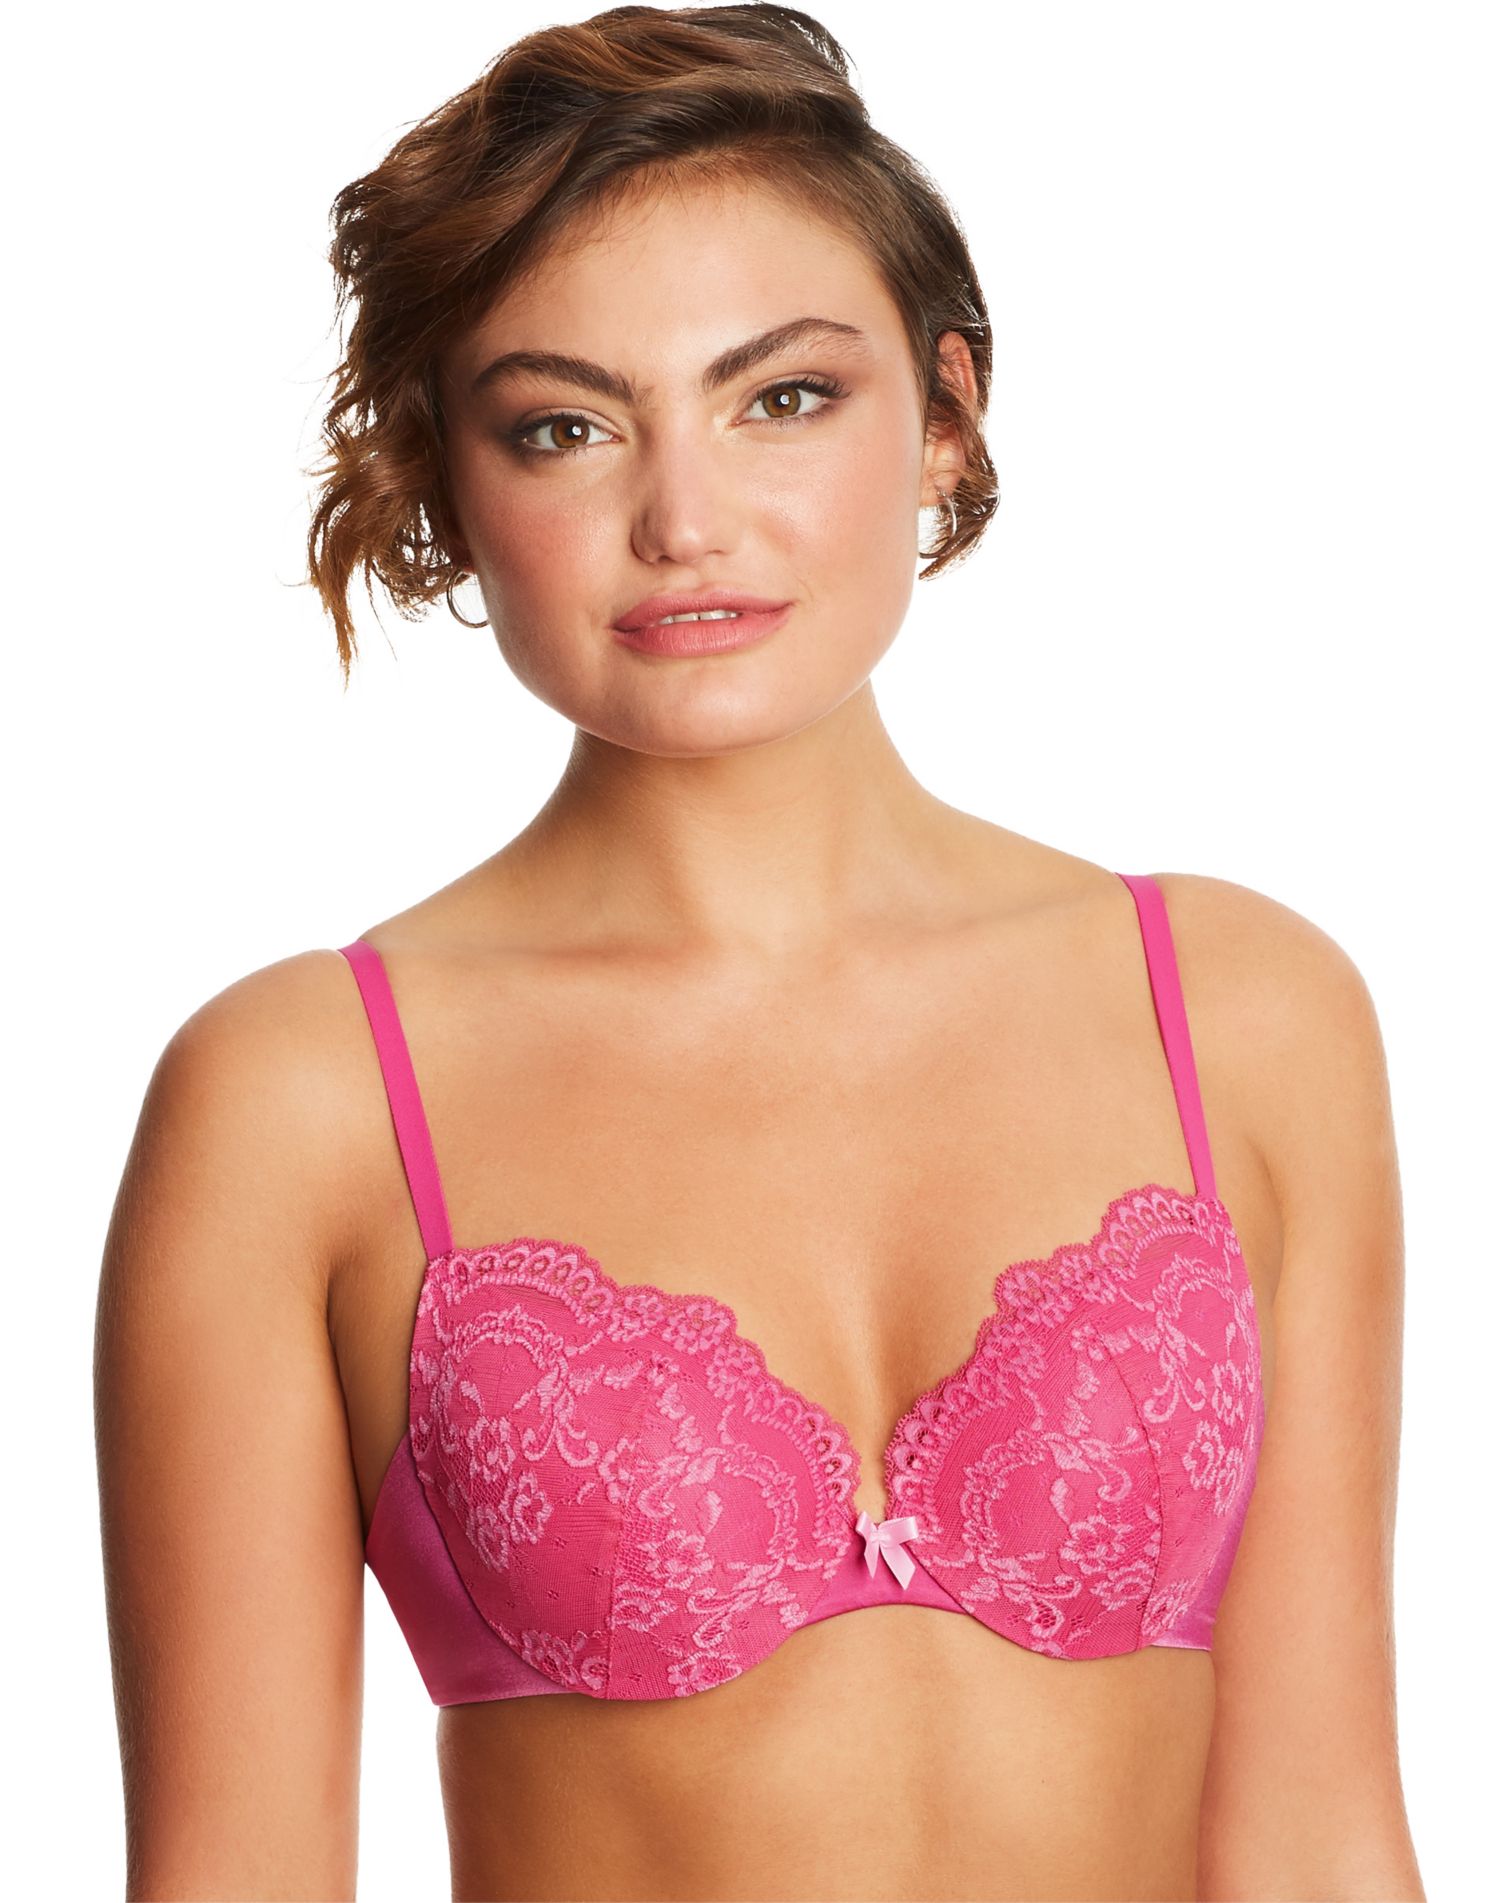 Lot of 2 Maidenform Inspirations 6406 padded push up bra's Pink Choose size  NWT